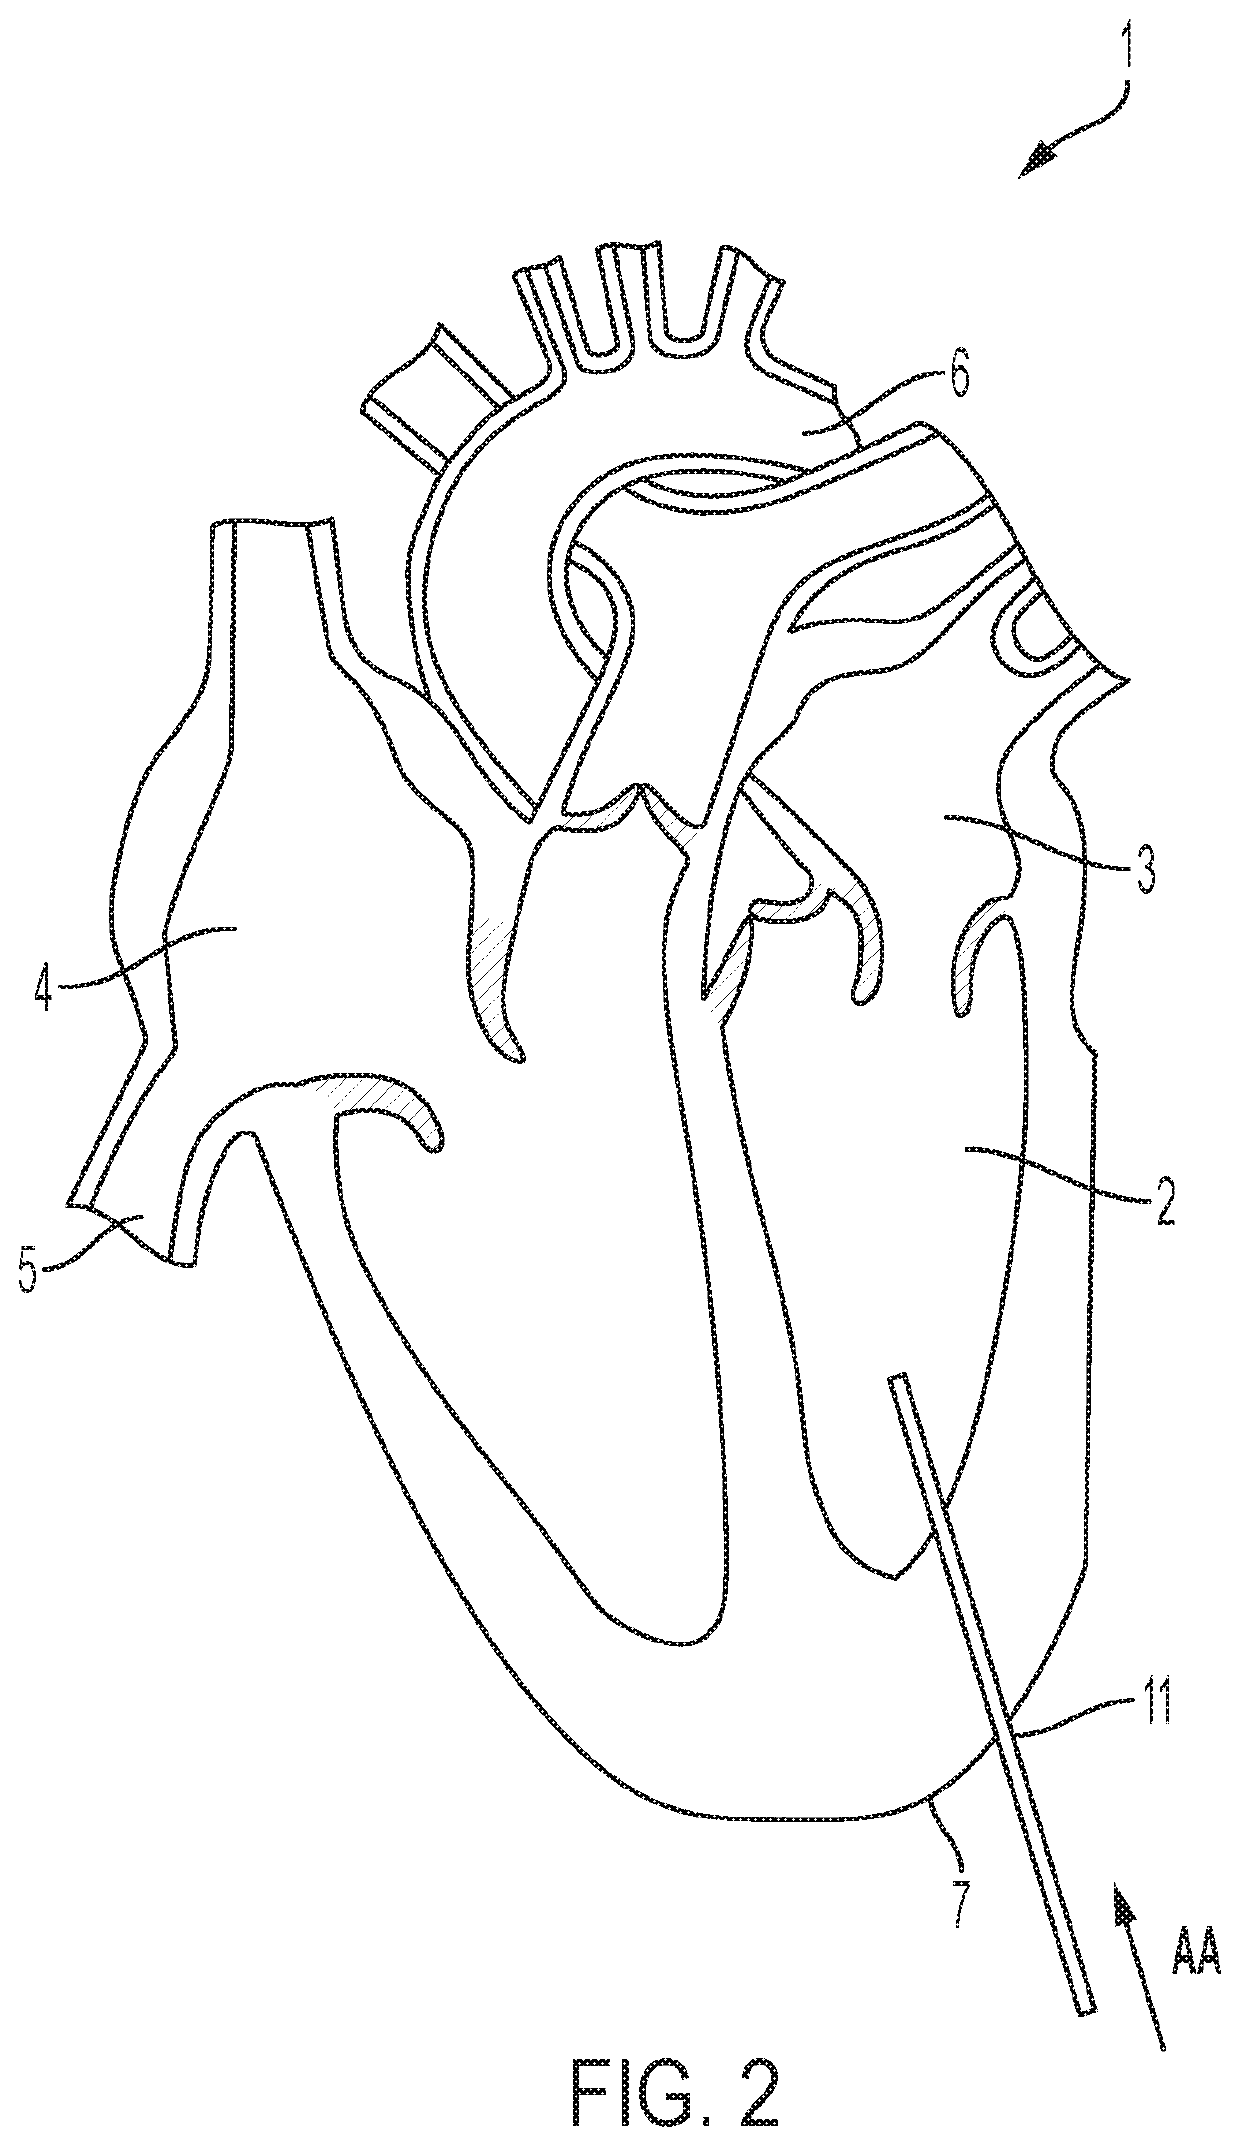 Apparatus and methods for delivery of prosthetic heart valves